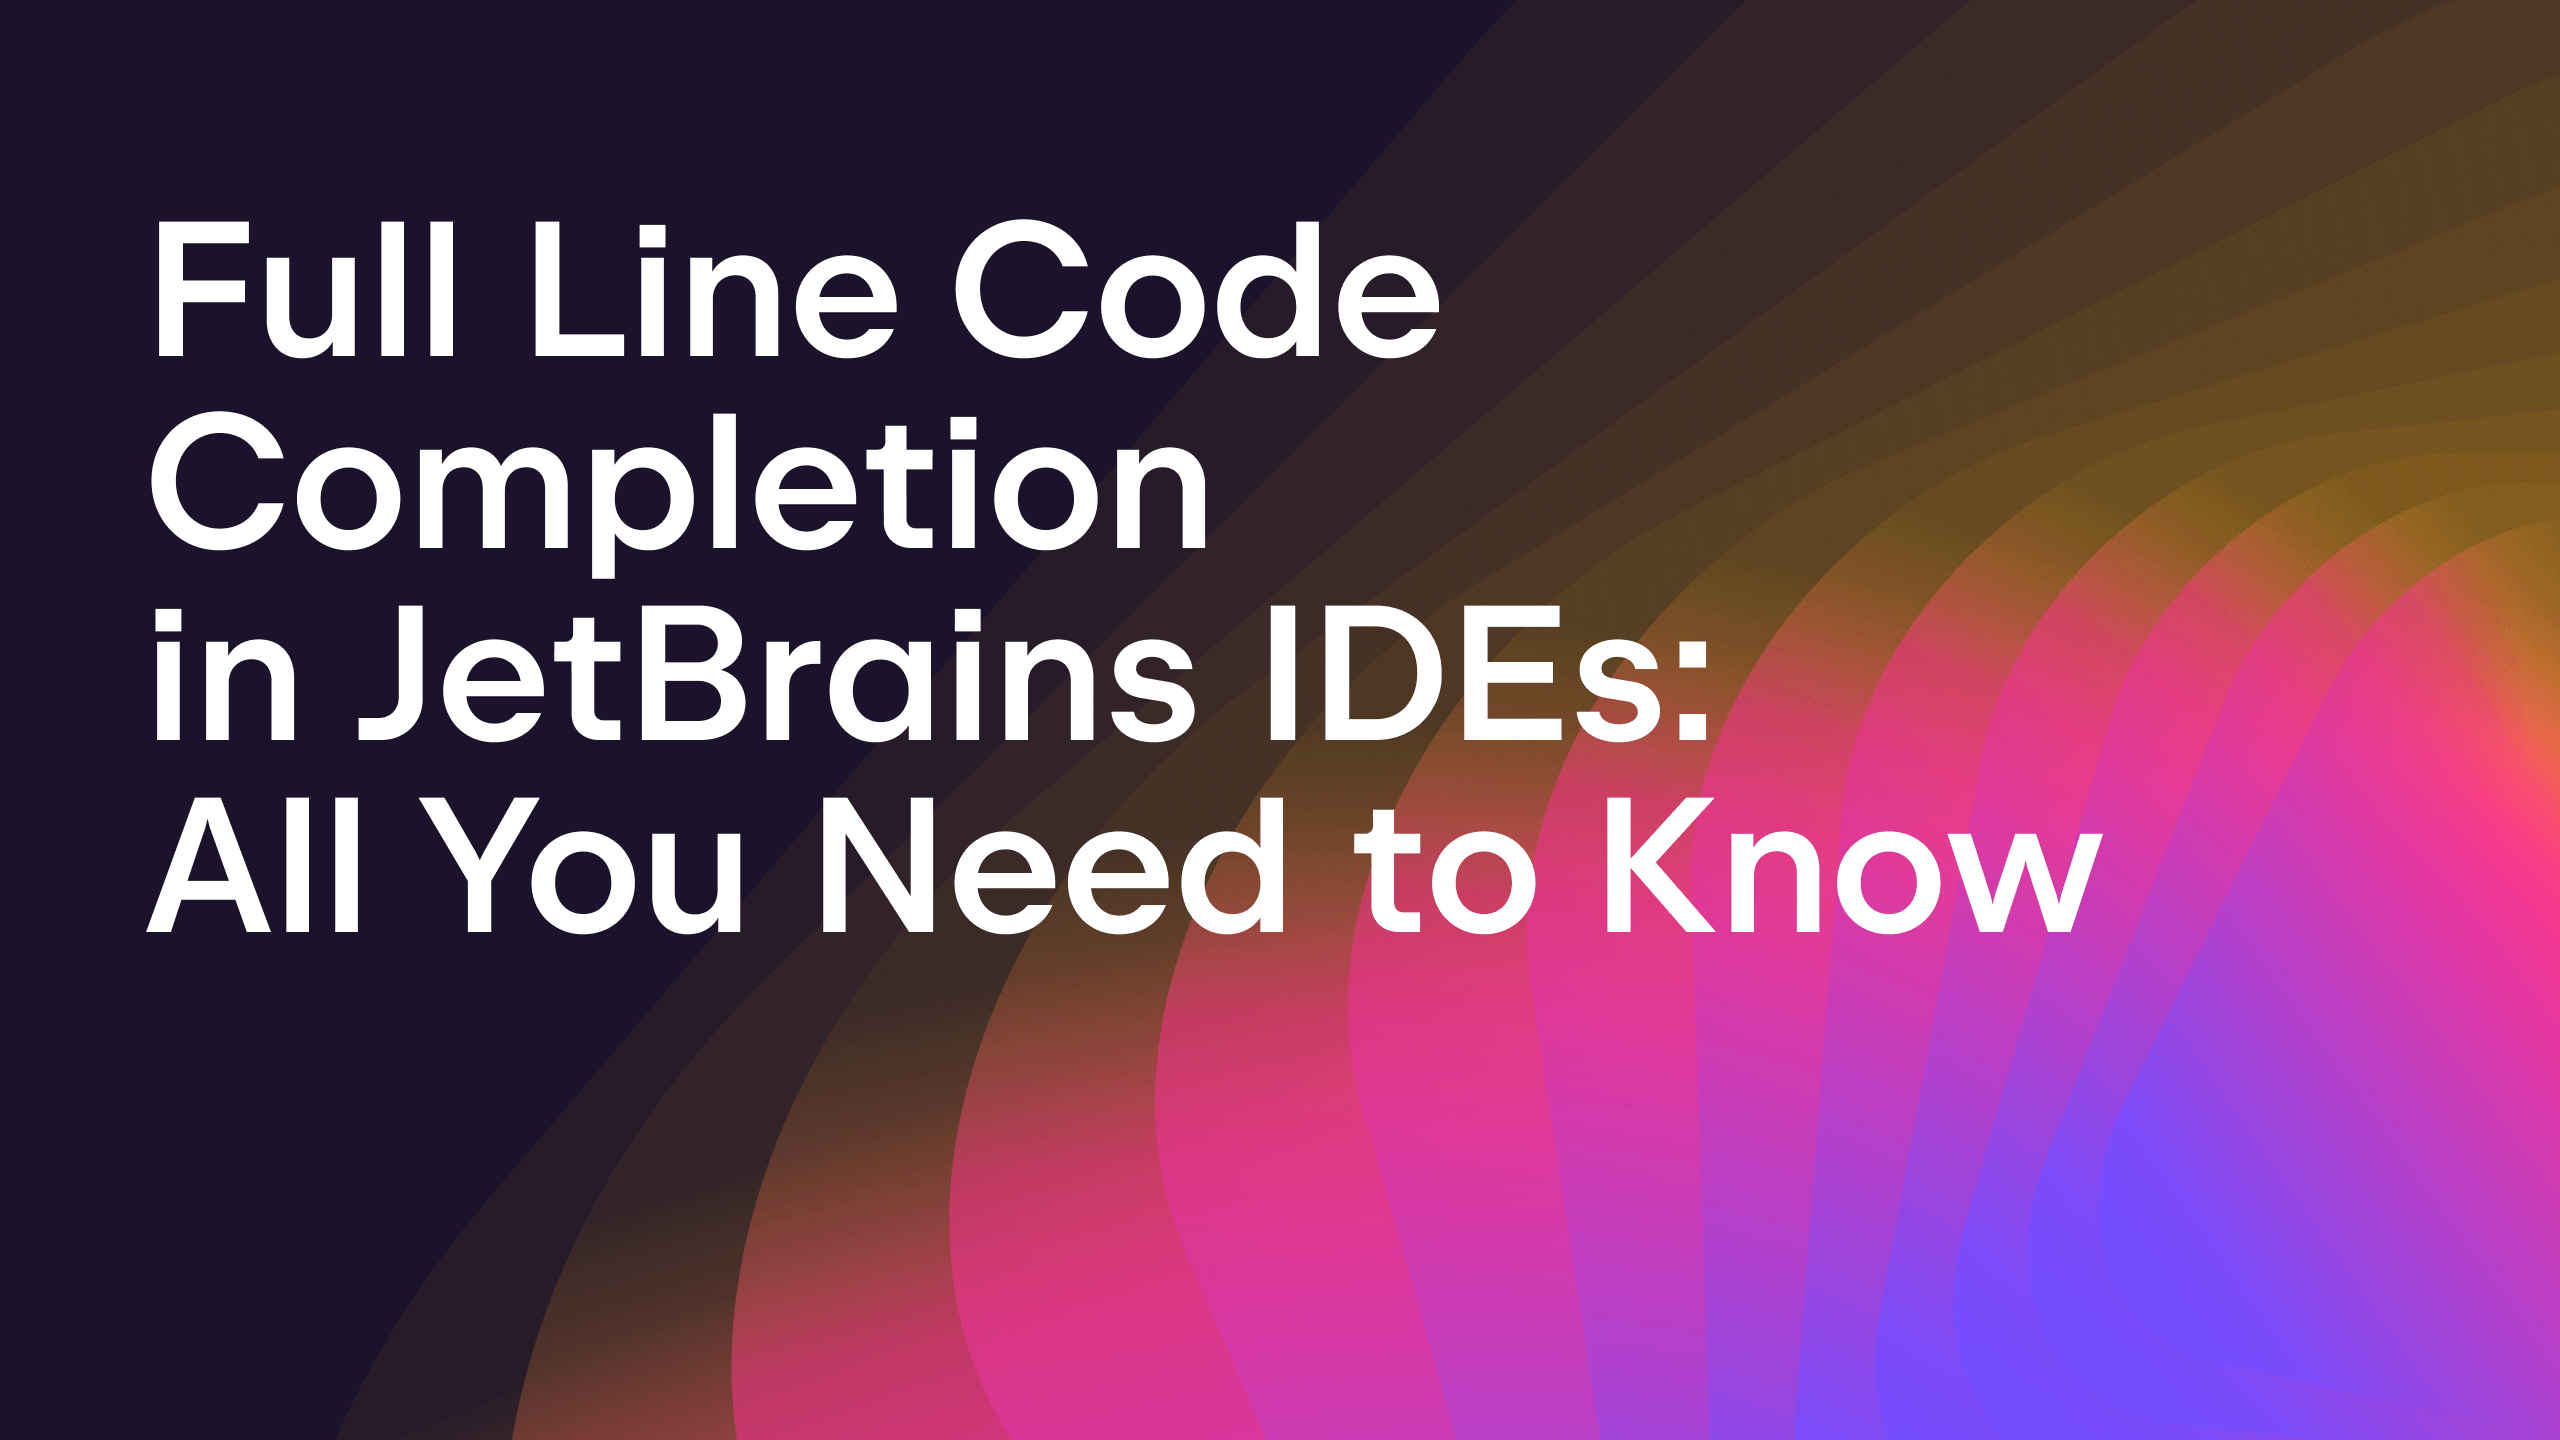 Full Line Code Completion in JetBrains IDEs, All You Need to Know